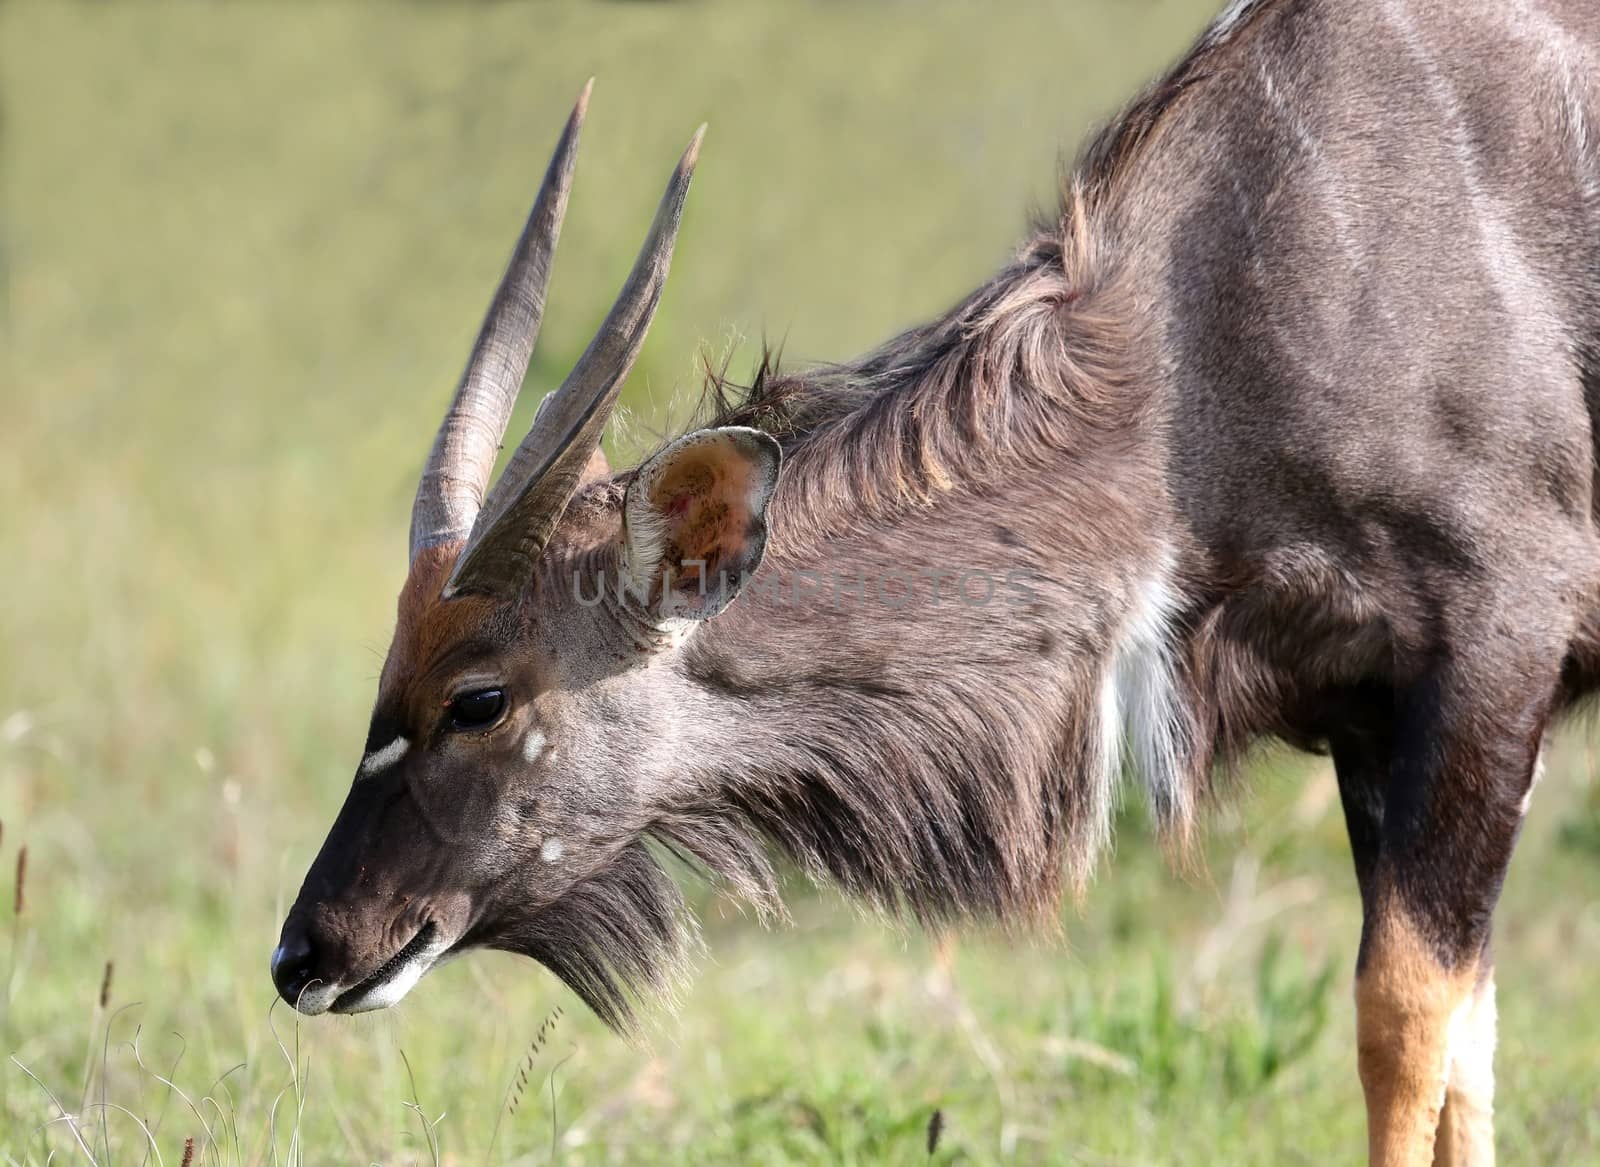 Nyala antelope male eating grass on the African plains